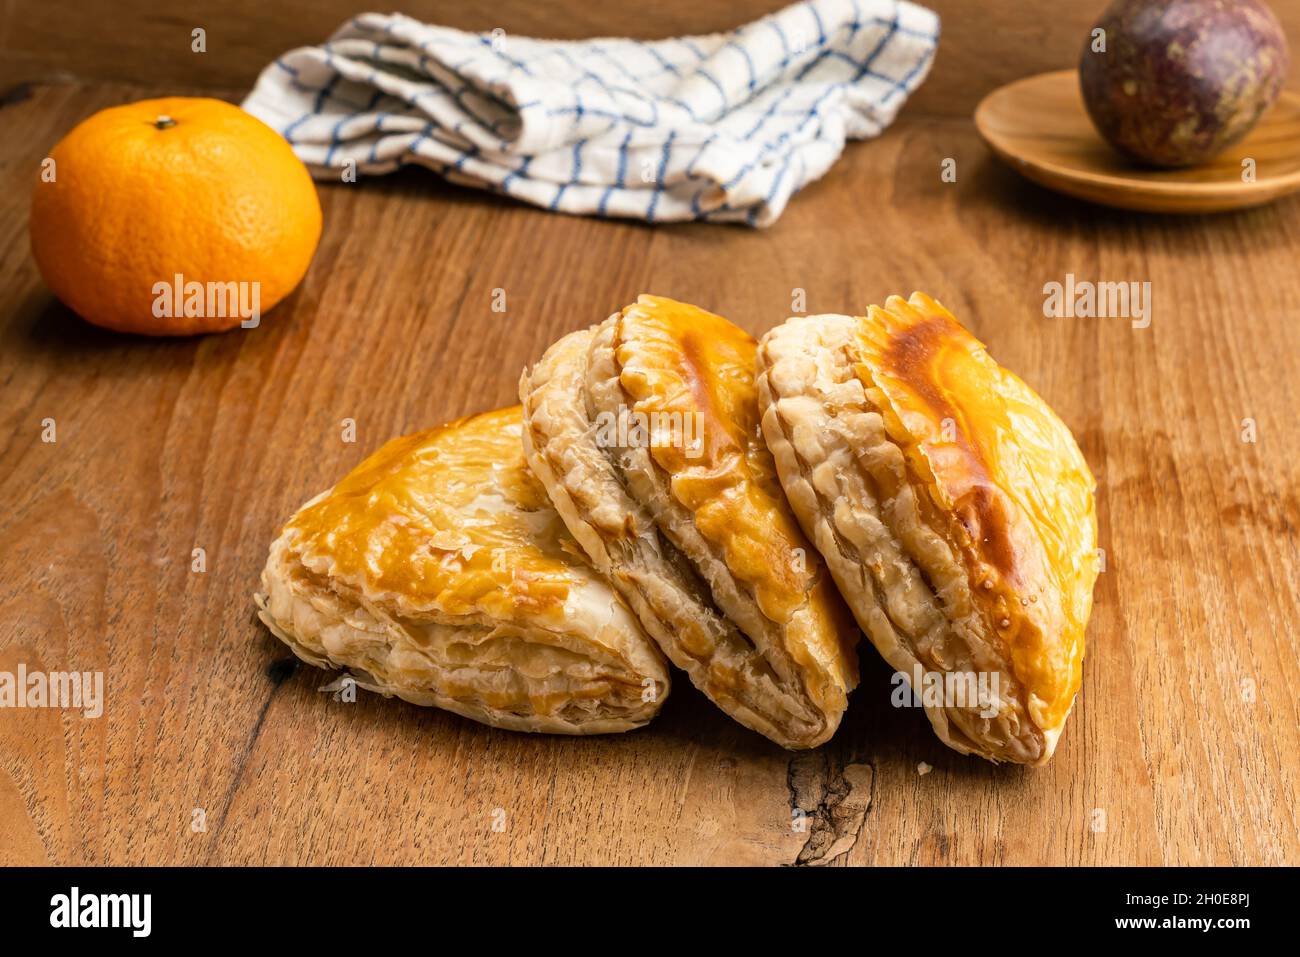 Delicious homemade tuna pie on wooden table with passion fruit in wooden plate, ripe orange and cloth. Stock Photo